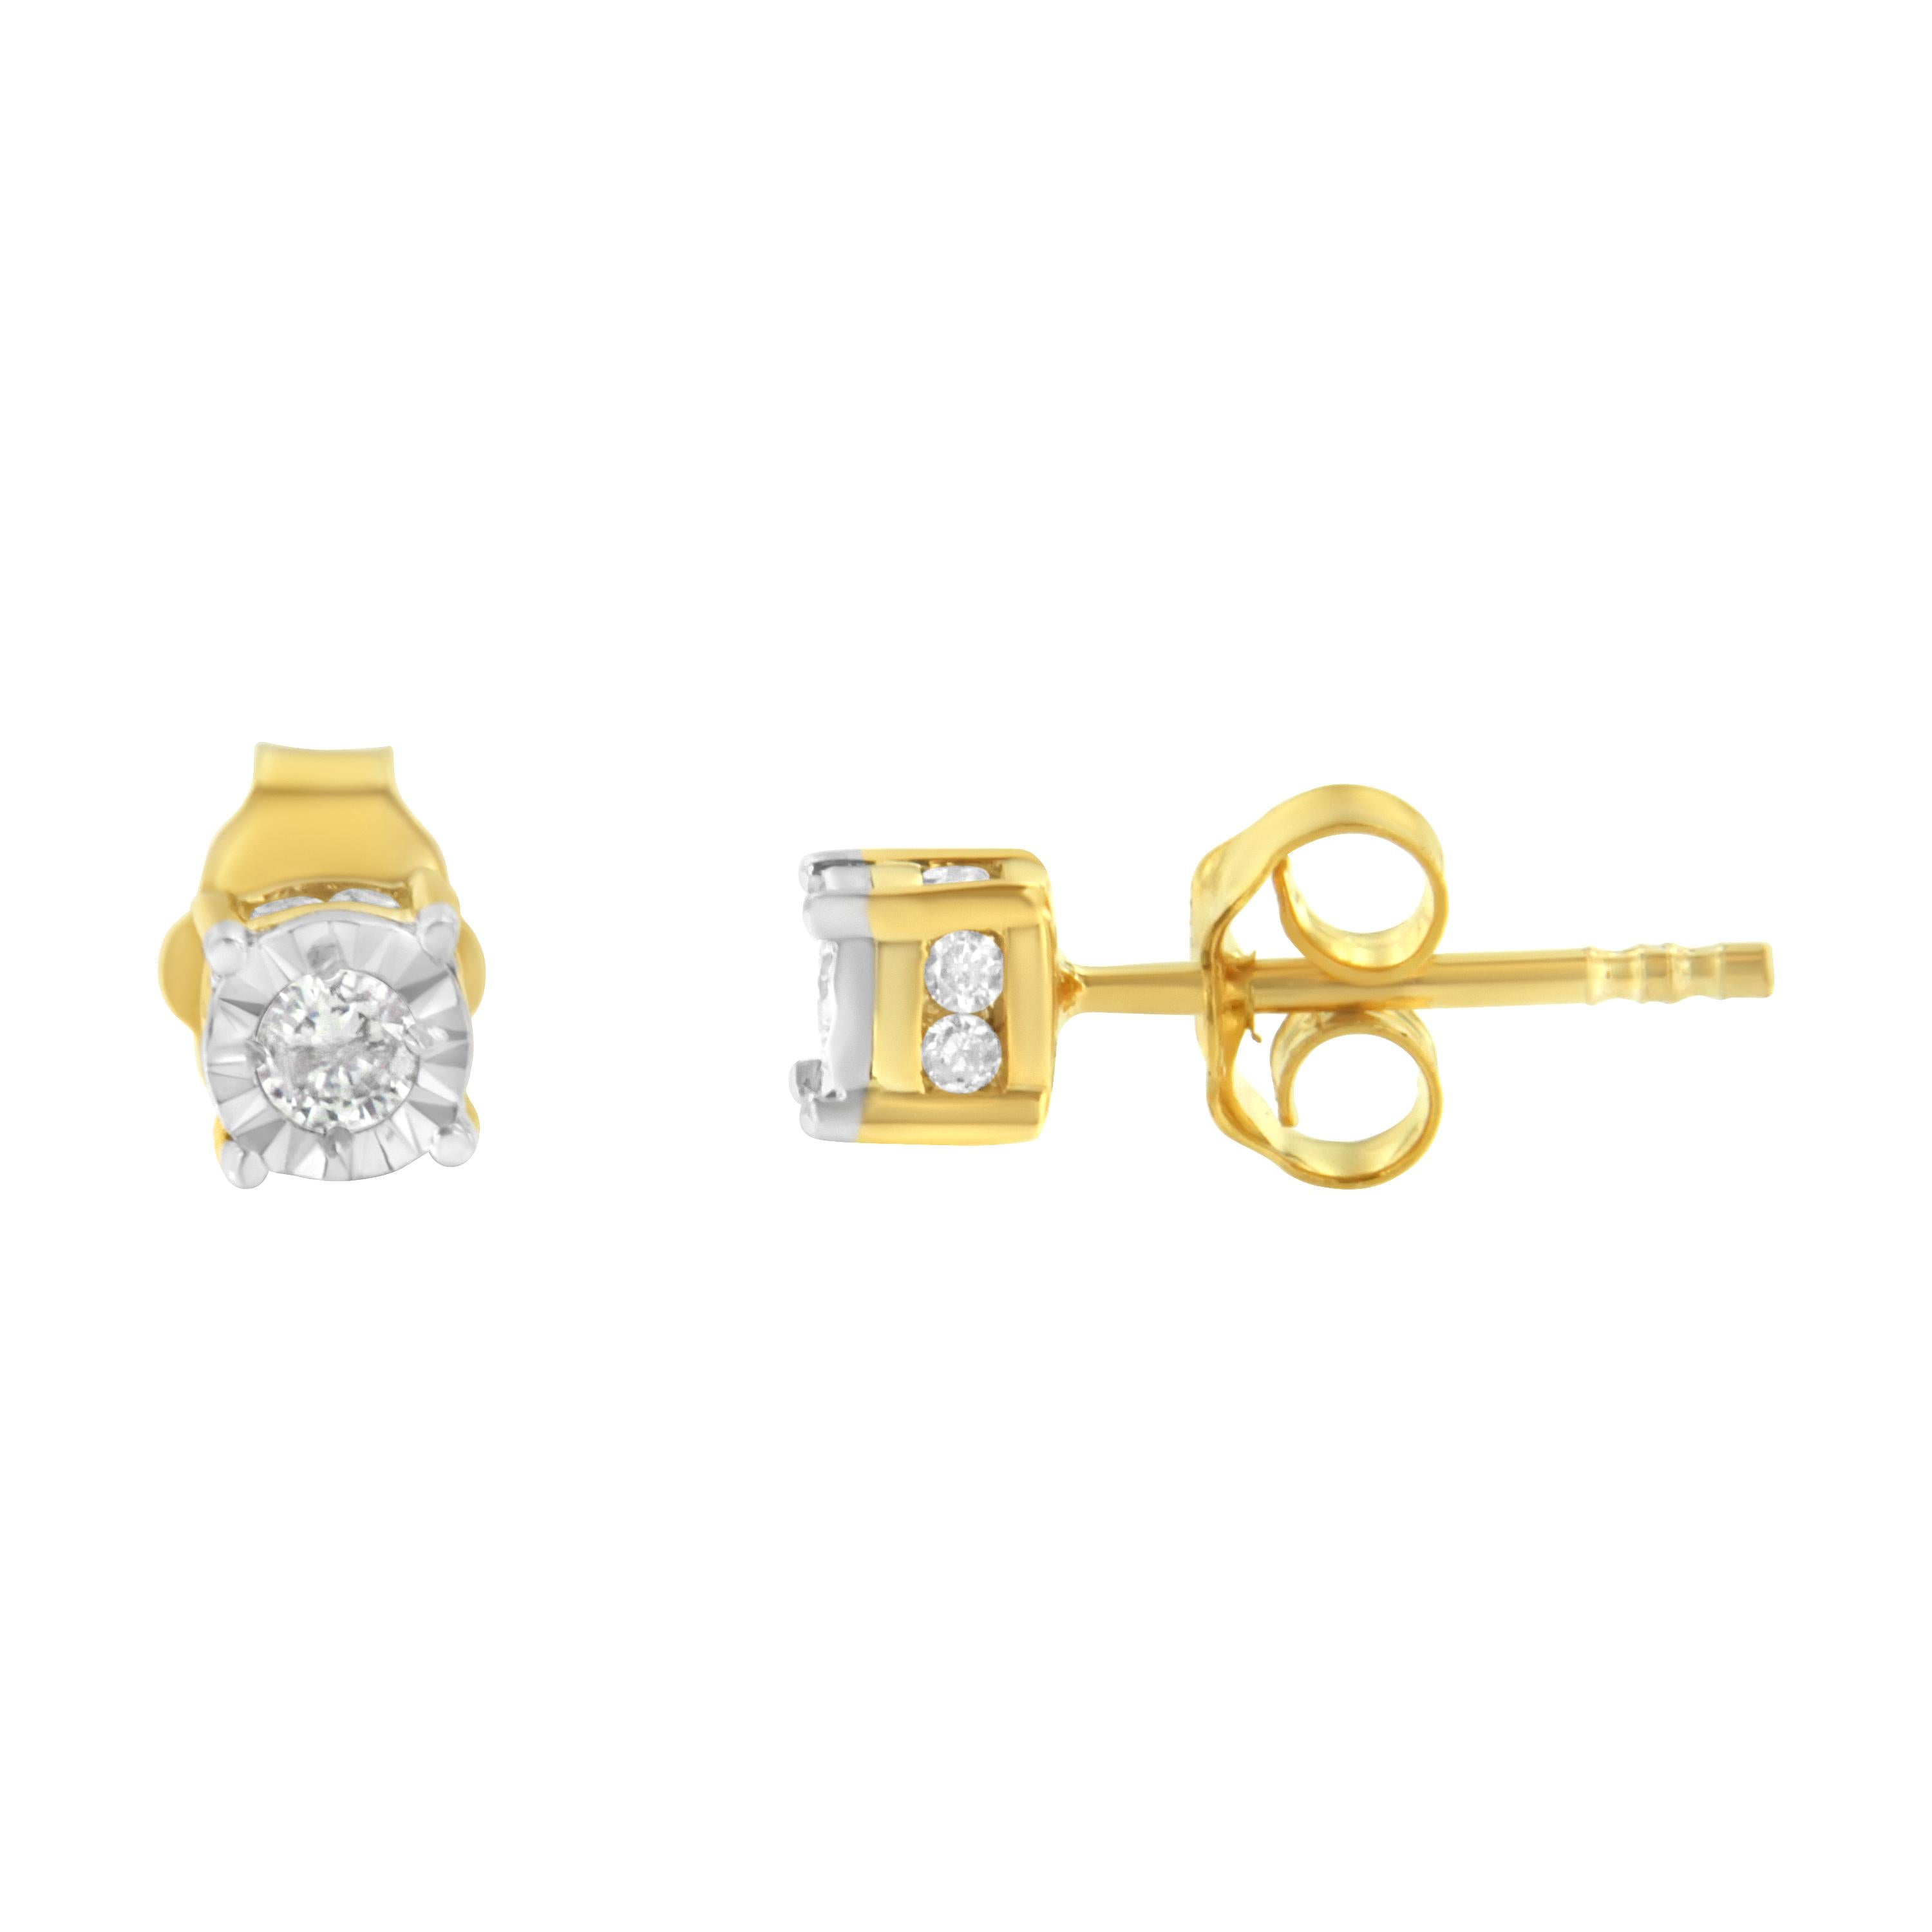 This charming pair of diamond studs features solitaire round brilliant cut diamonds. The classic design is crafted in yellow plated sterling silver making them the perfect to add sparkle to any outfit. The total diamond weight is 1/4 carat.

